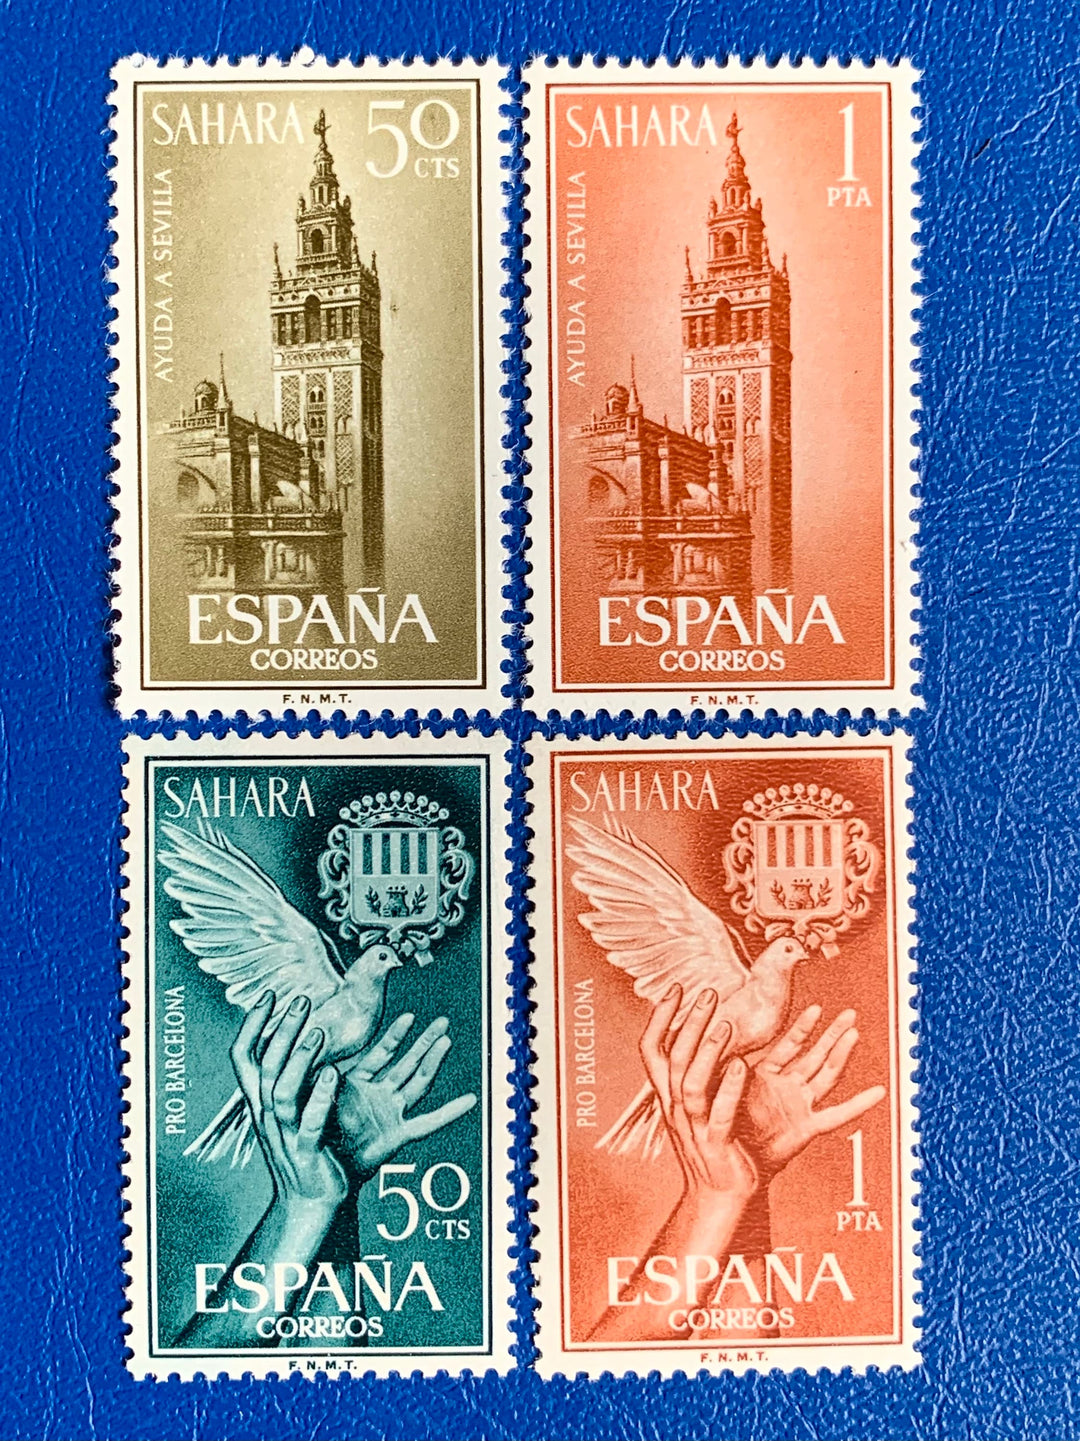 Sp. Sahara - Original Vintage Postage Stamps - 1963 - Aid to Barcelona and Seville - for the collector, artist or crafter